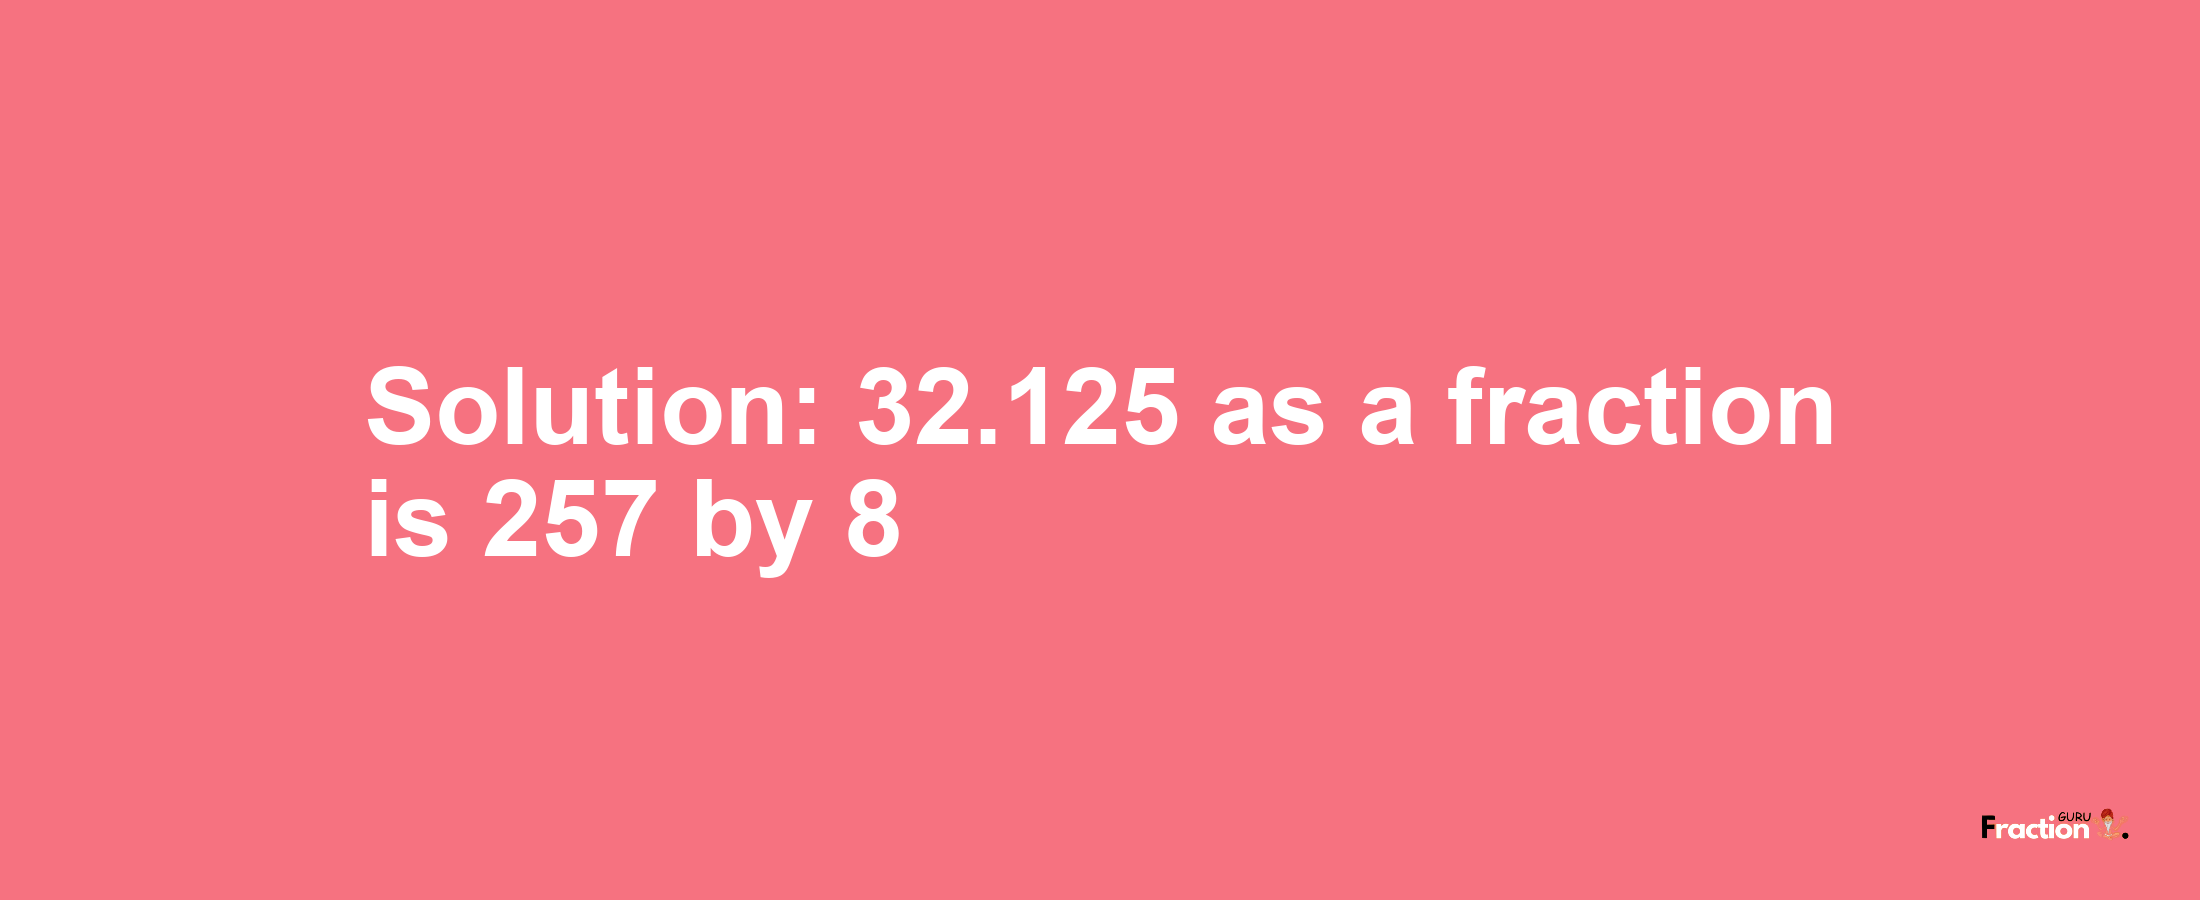 Solution:32.125 as a fraction is 257/8